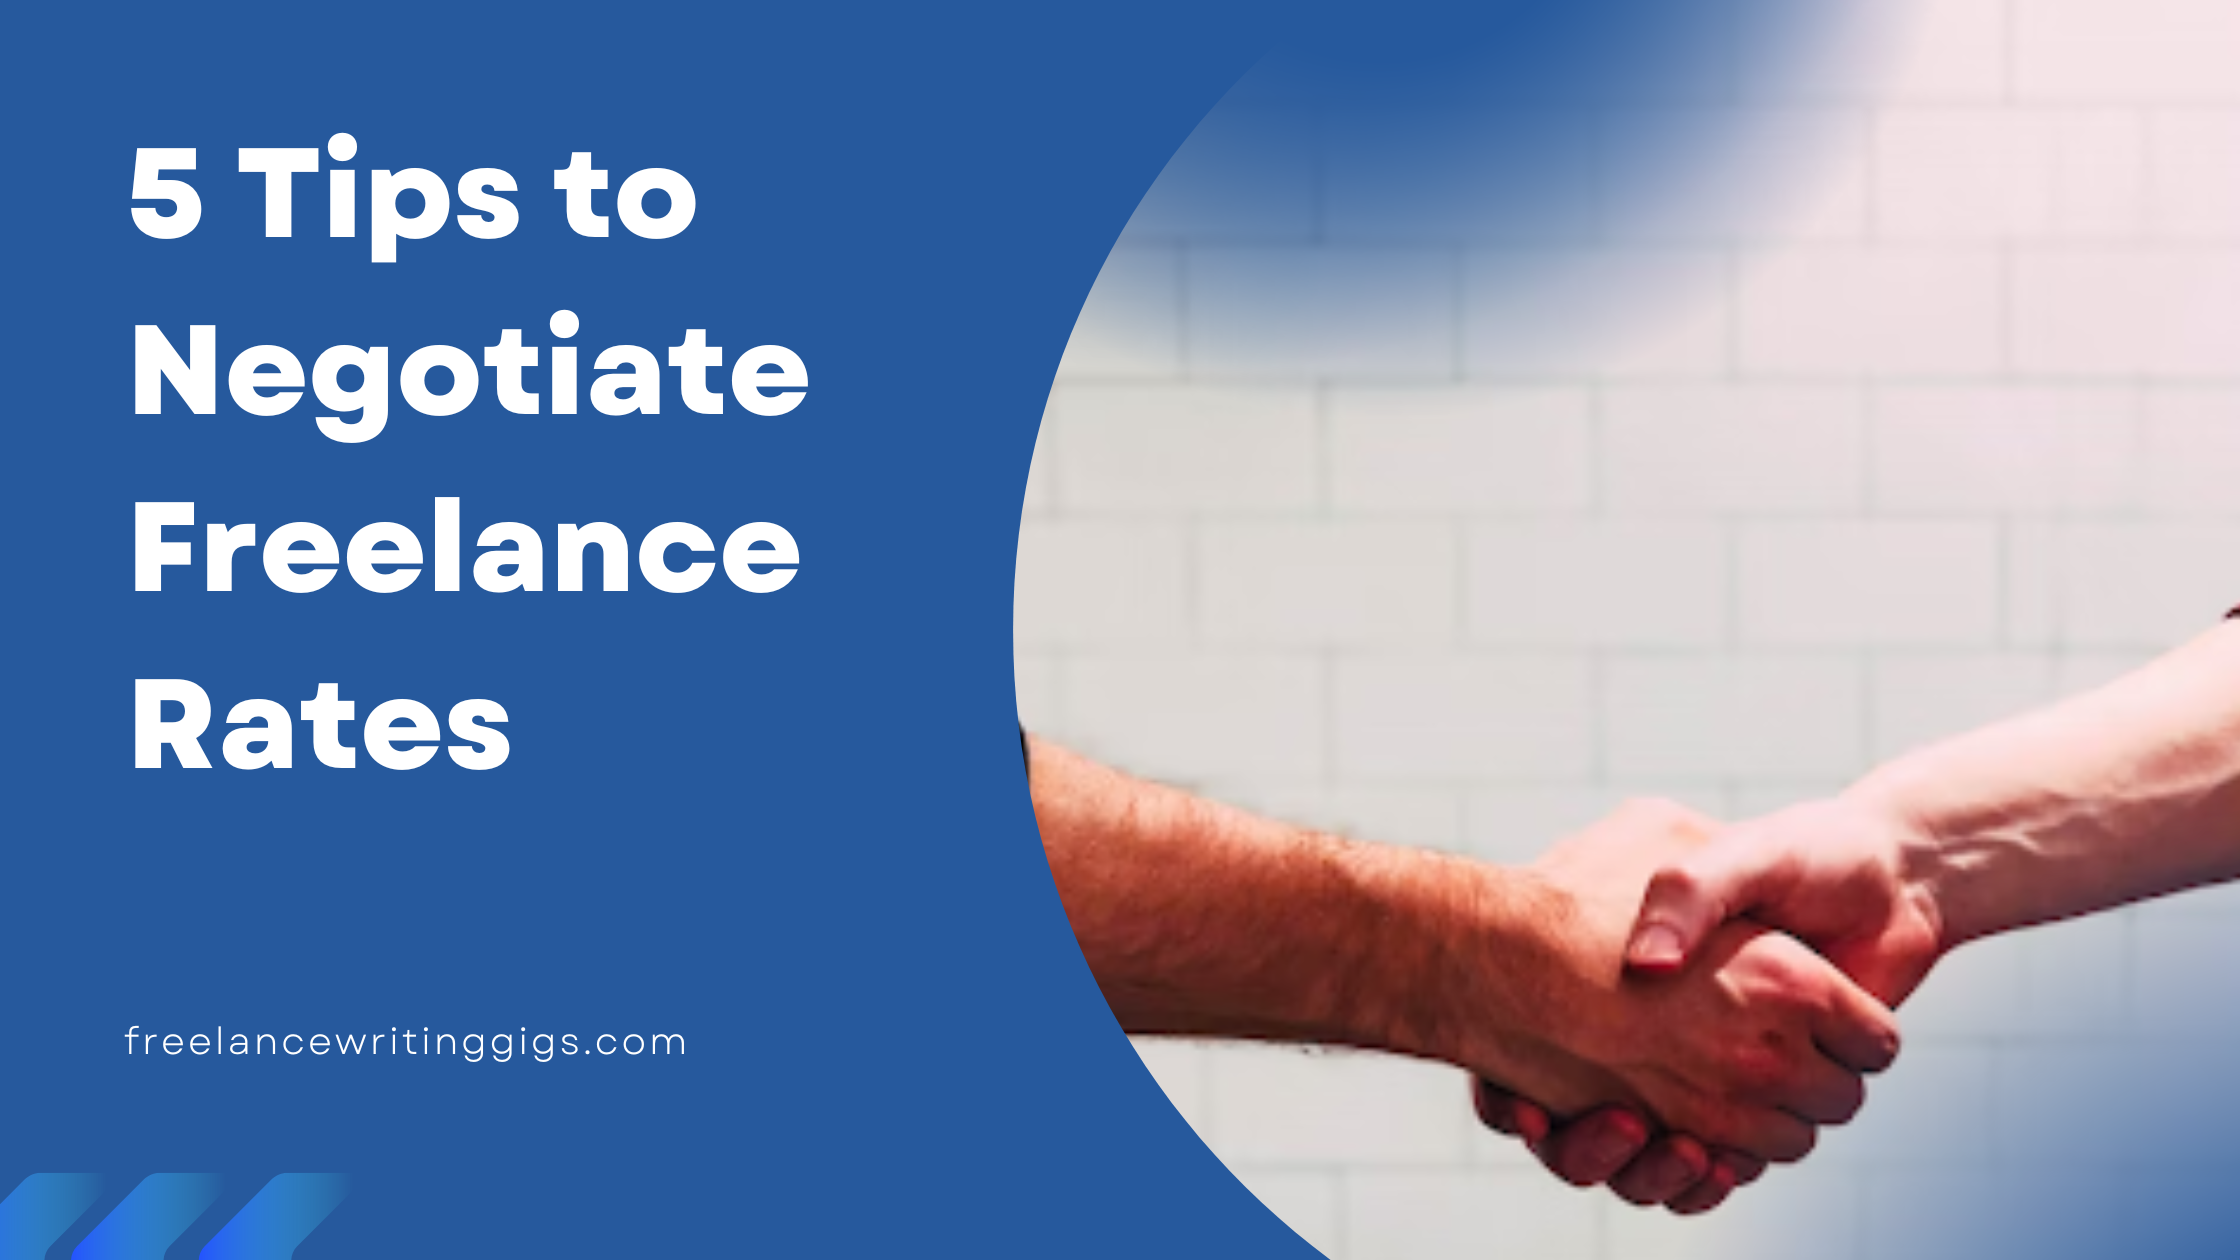 5 Win-Win Tips to Negotiate Freelance Rates